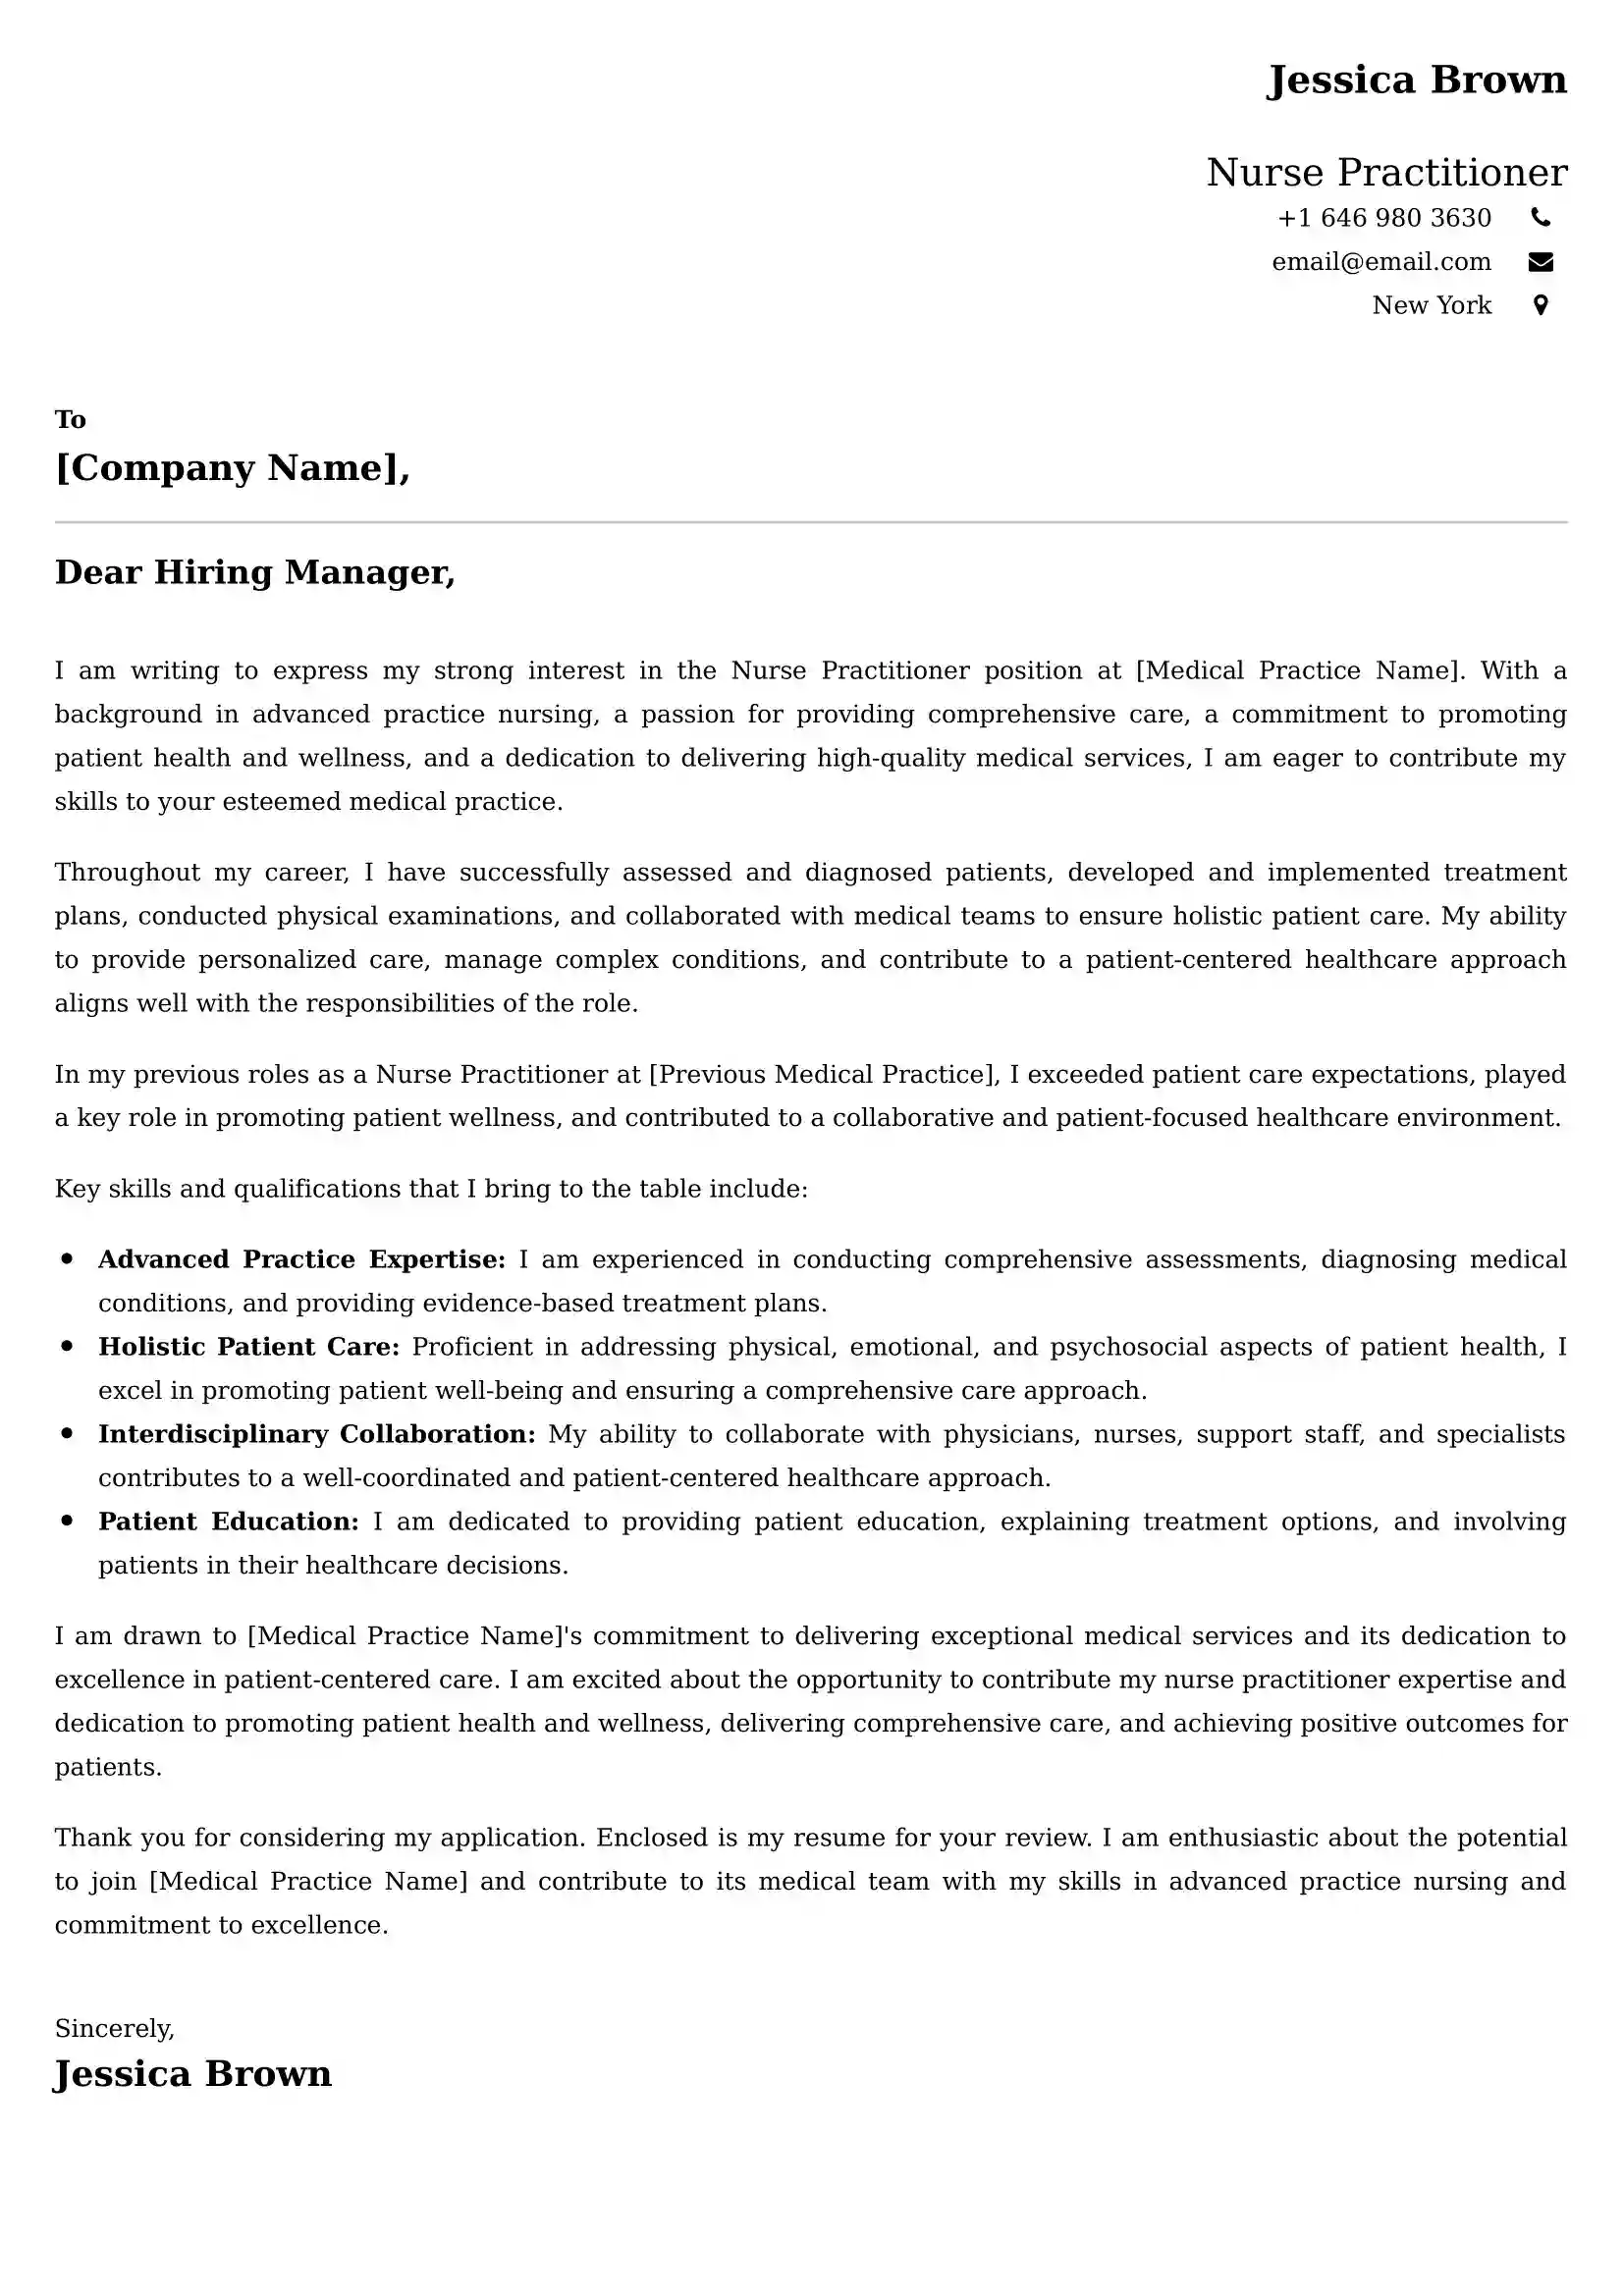 Nurse Practitioner Cover Letter Examples -Latest Brazilian Templates